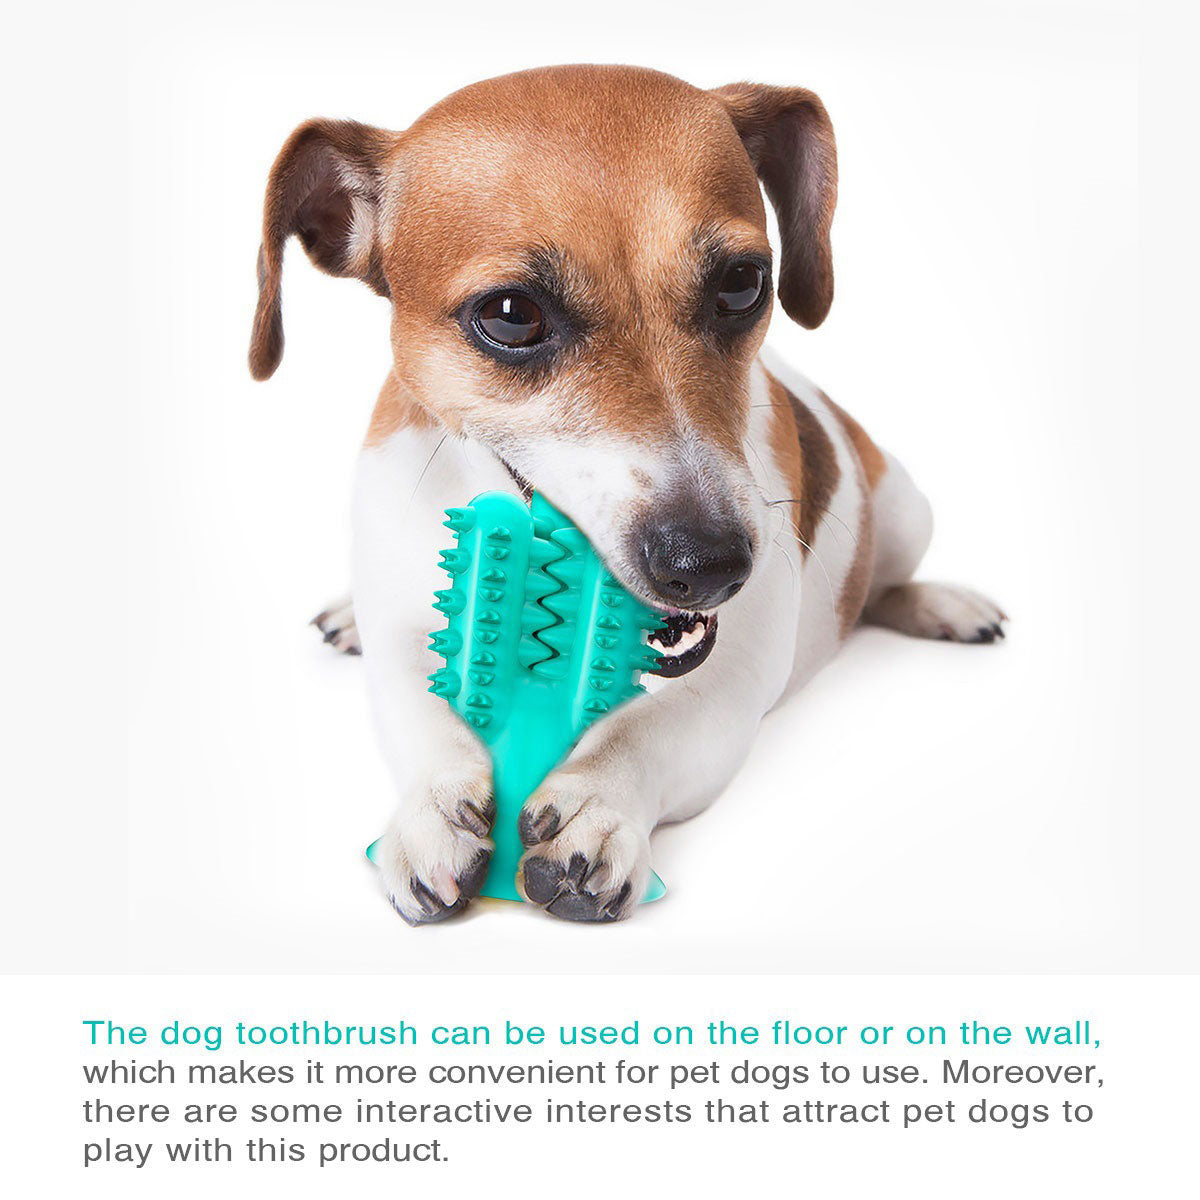 https://cdn.shopifycdn.net/s/files/1/0065/3629/8594/files/PETDURO-Dog-Chew-Toys-Indestructible-Tough-Dental-Teething-Toys-with-Rubble-Suction-Cup-3.jpg?v=1596607124